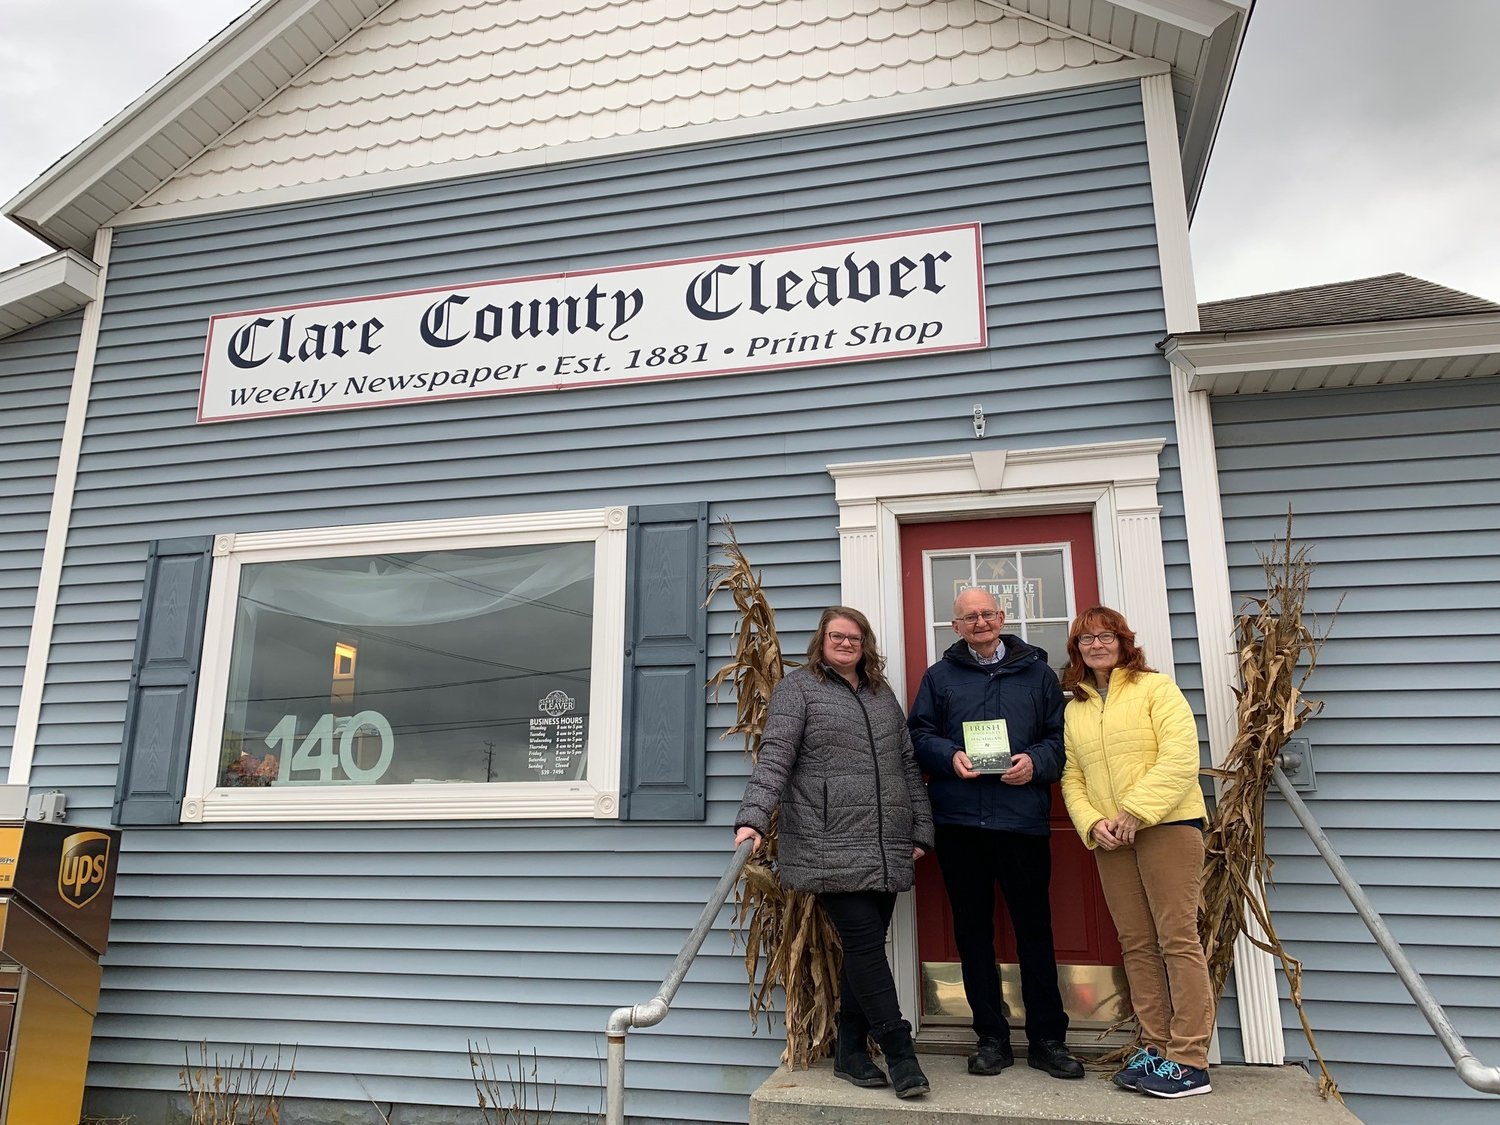 Angela Kellogg, authors Pat Commins and Elizabeth Rice gather on the steps of the Clare County Cleaver during the authors’ recent visit to Clare County.